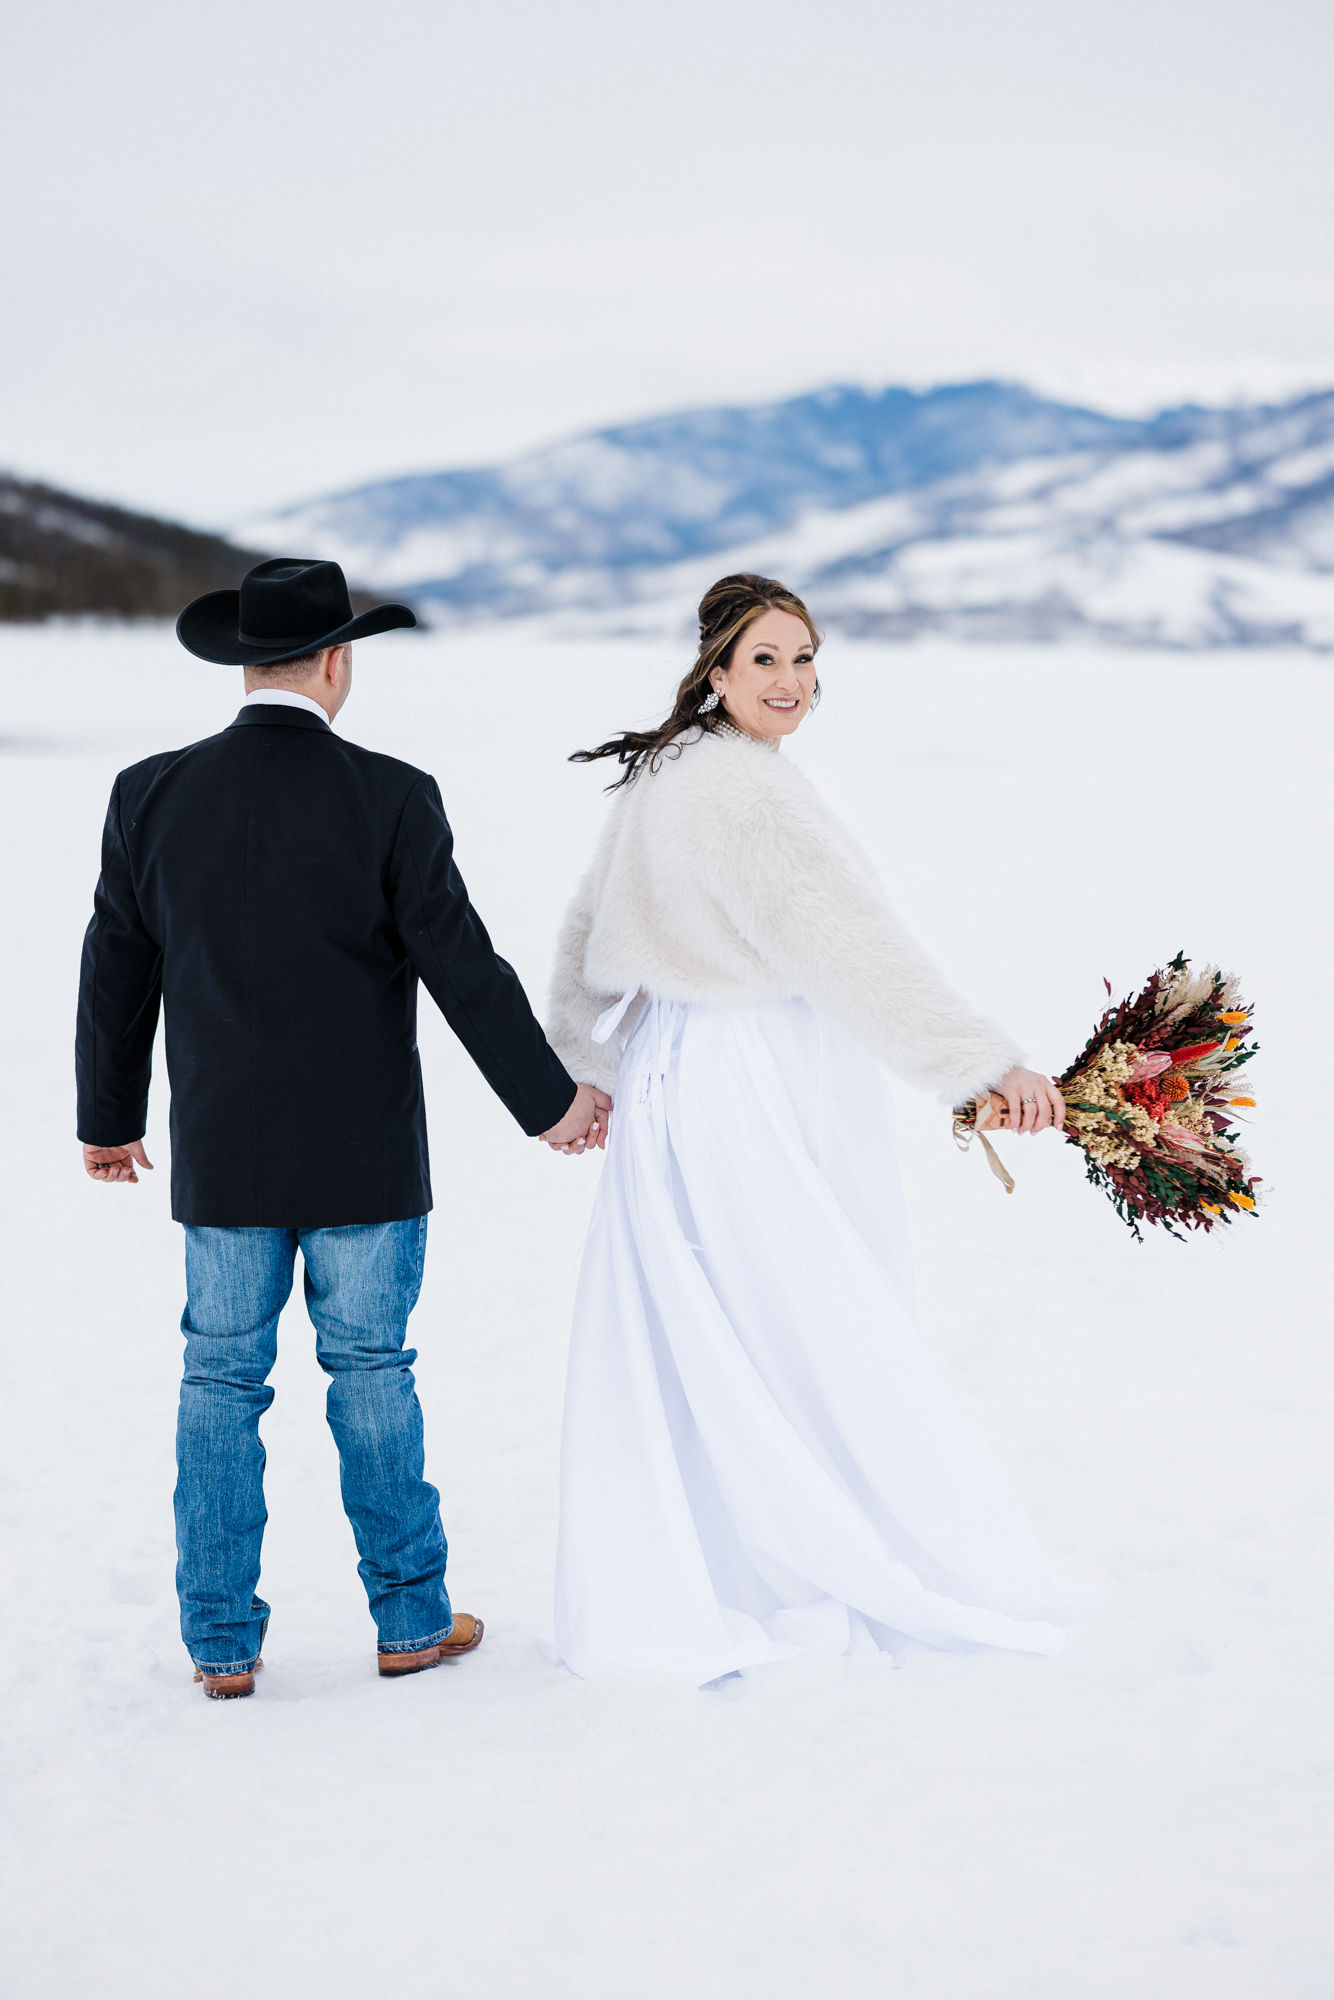 bride and groom choose a hike through the snow as an idea for their second wedding.